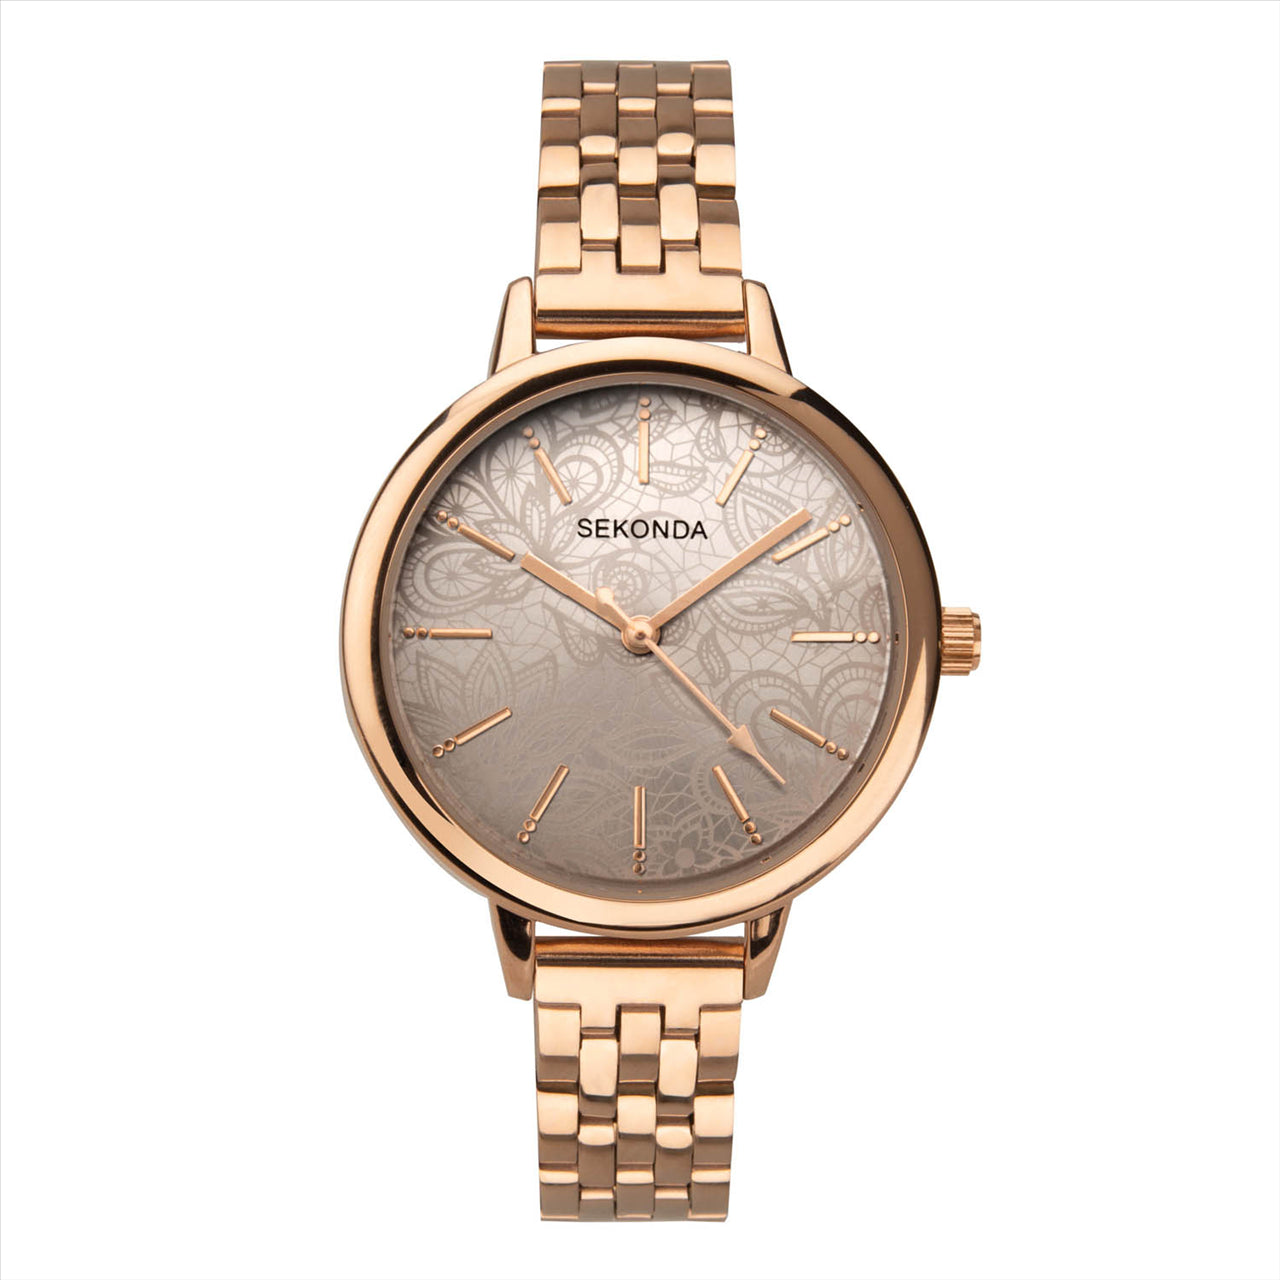 Sekonda Ladies Watch SK40306, Rose Gold Plated Case and Band with Decorative Dial